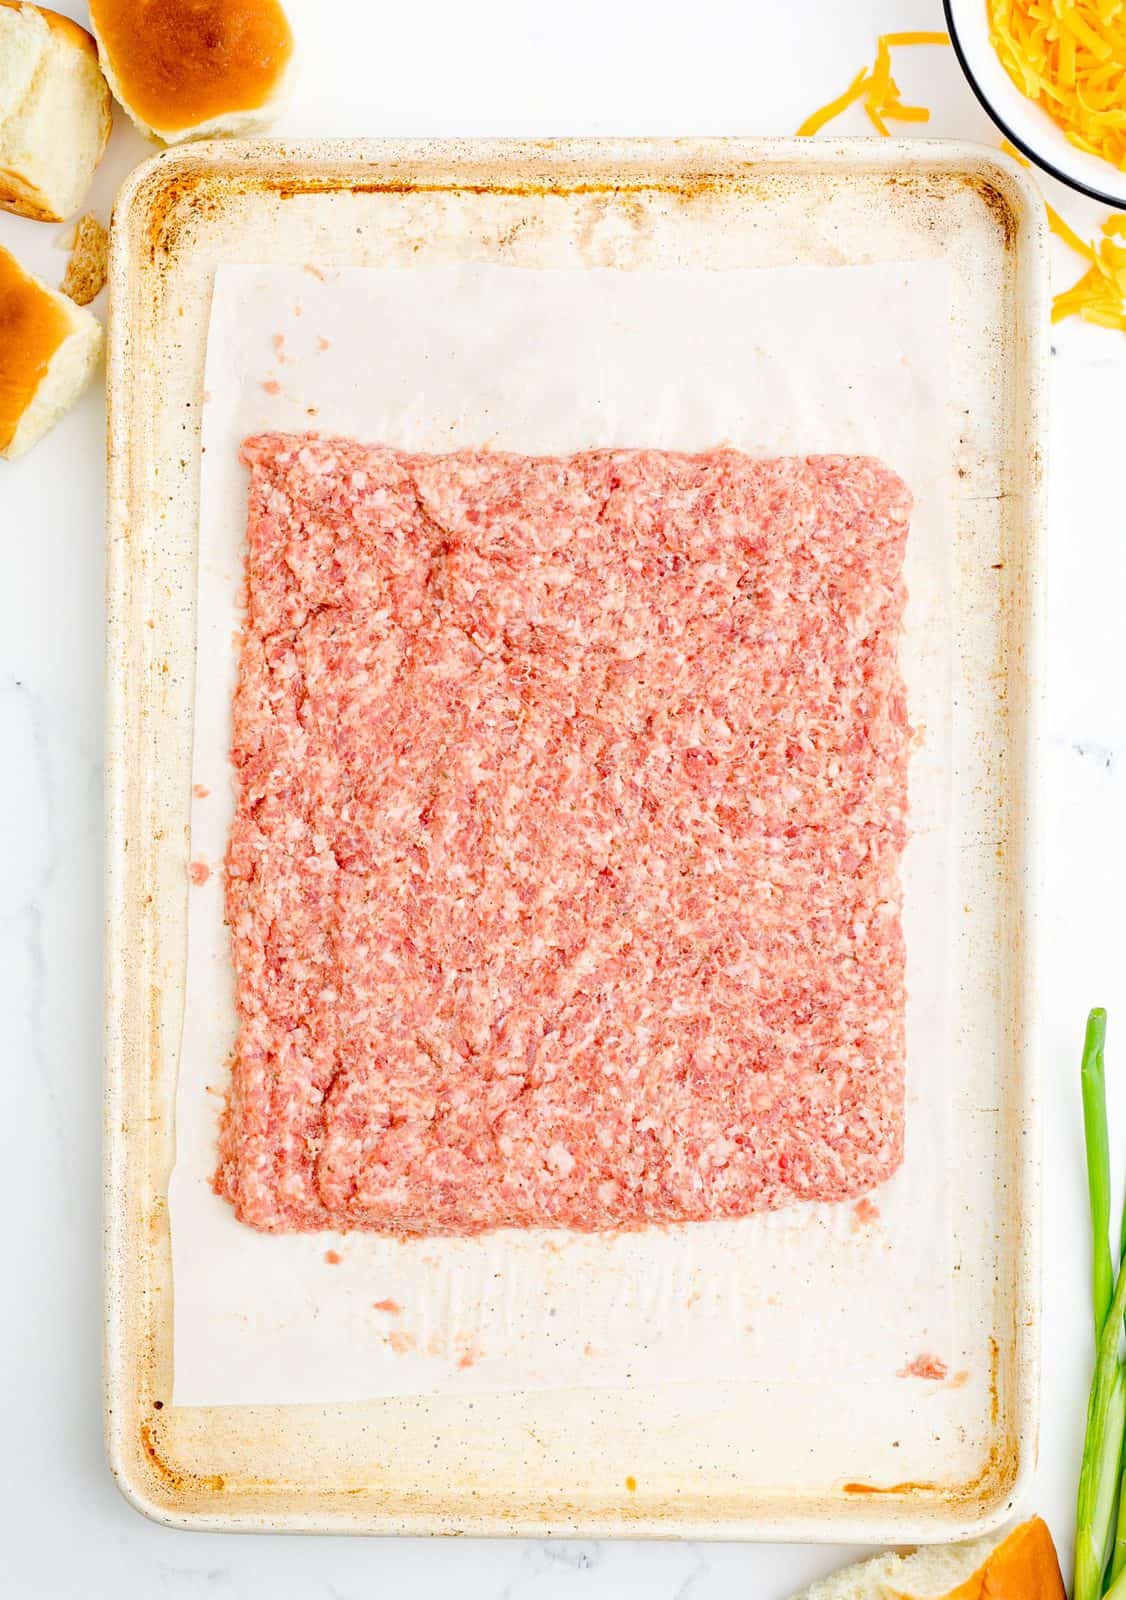 Pork sausage pressed into a rectangle on parchment lined baking sheet.